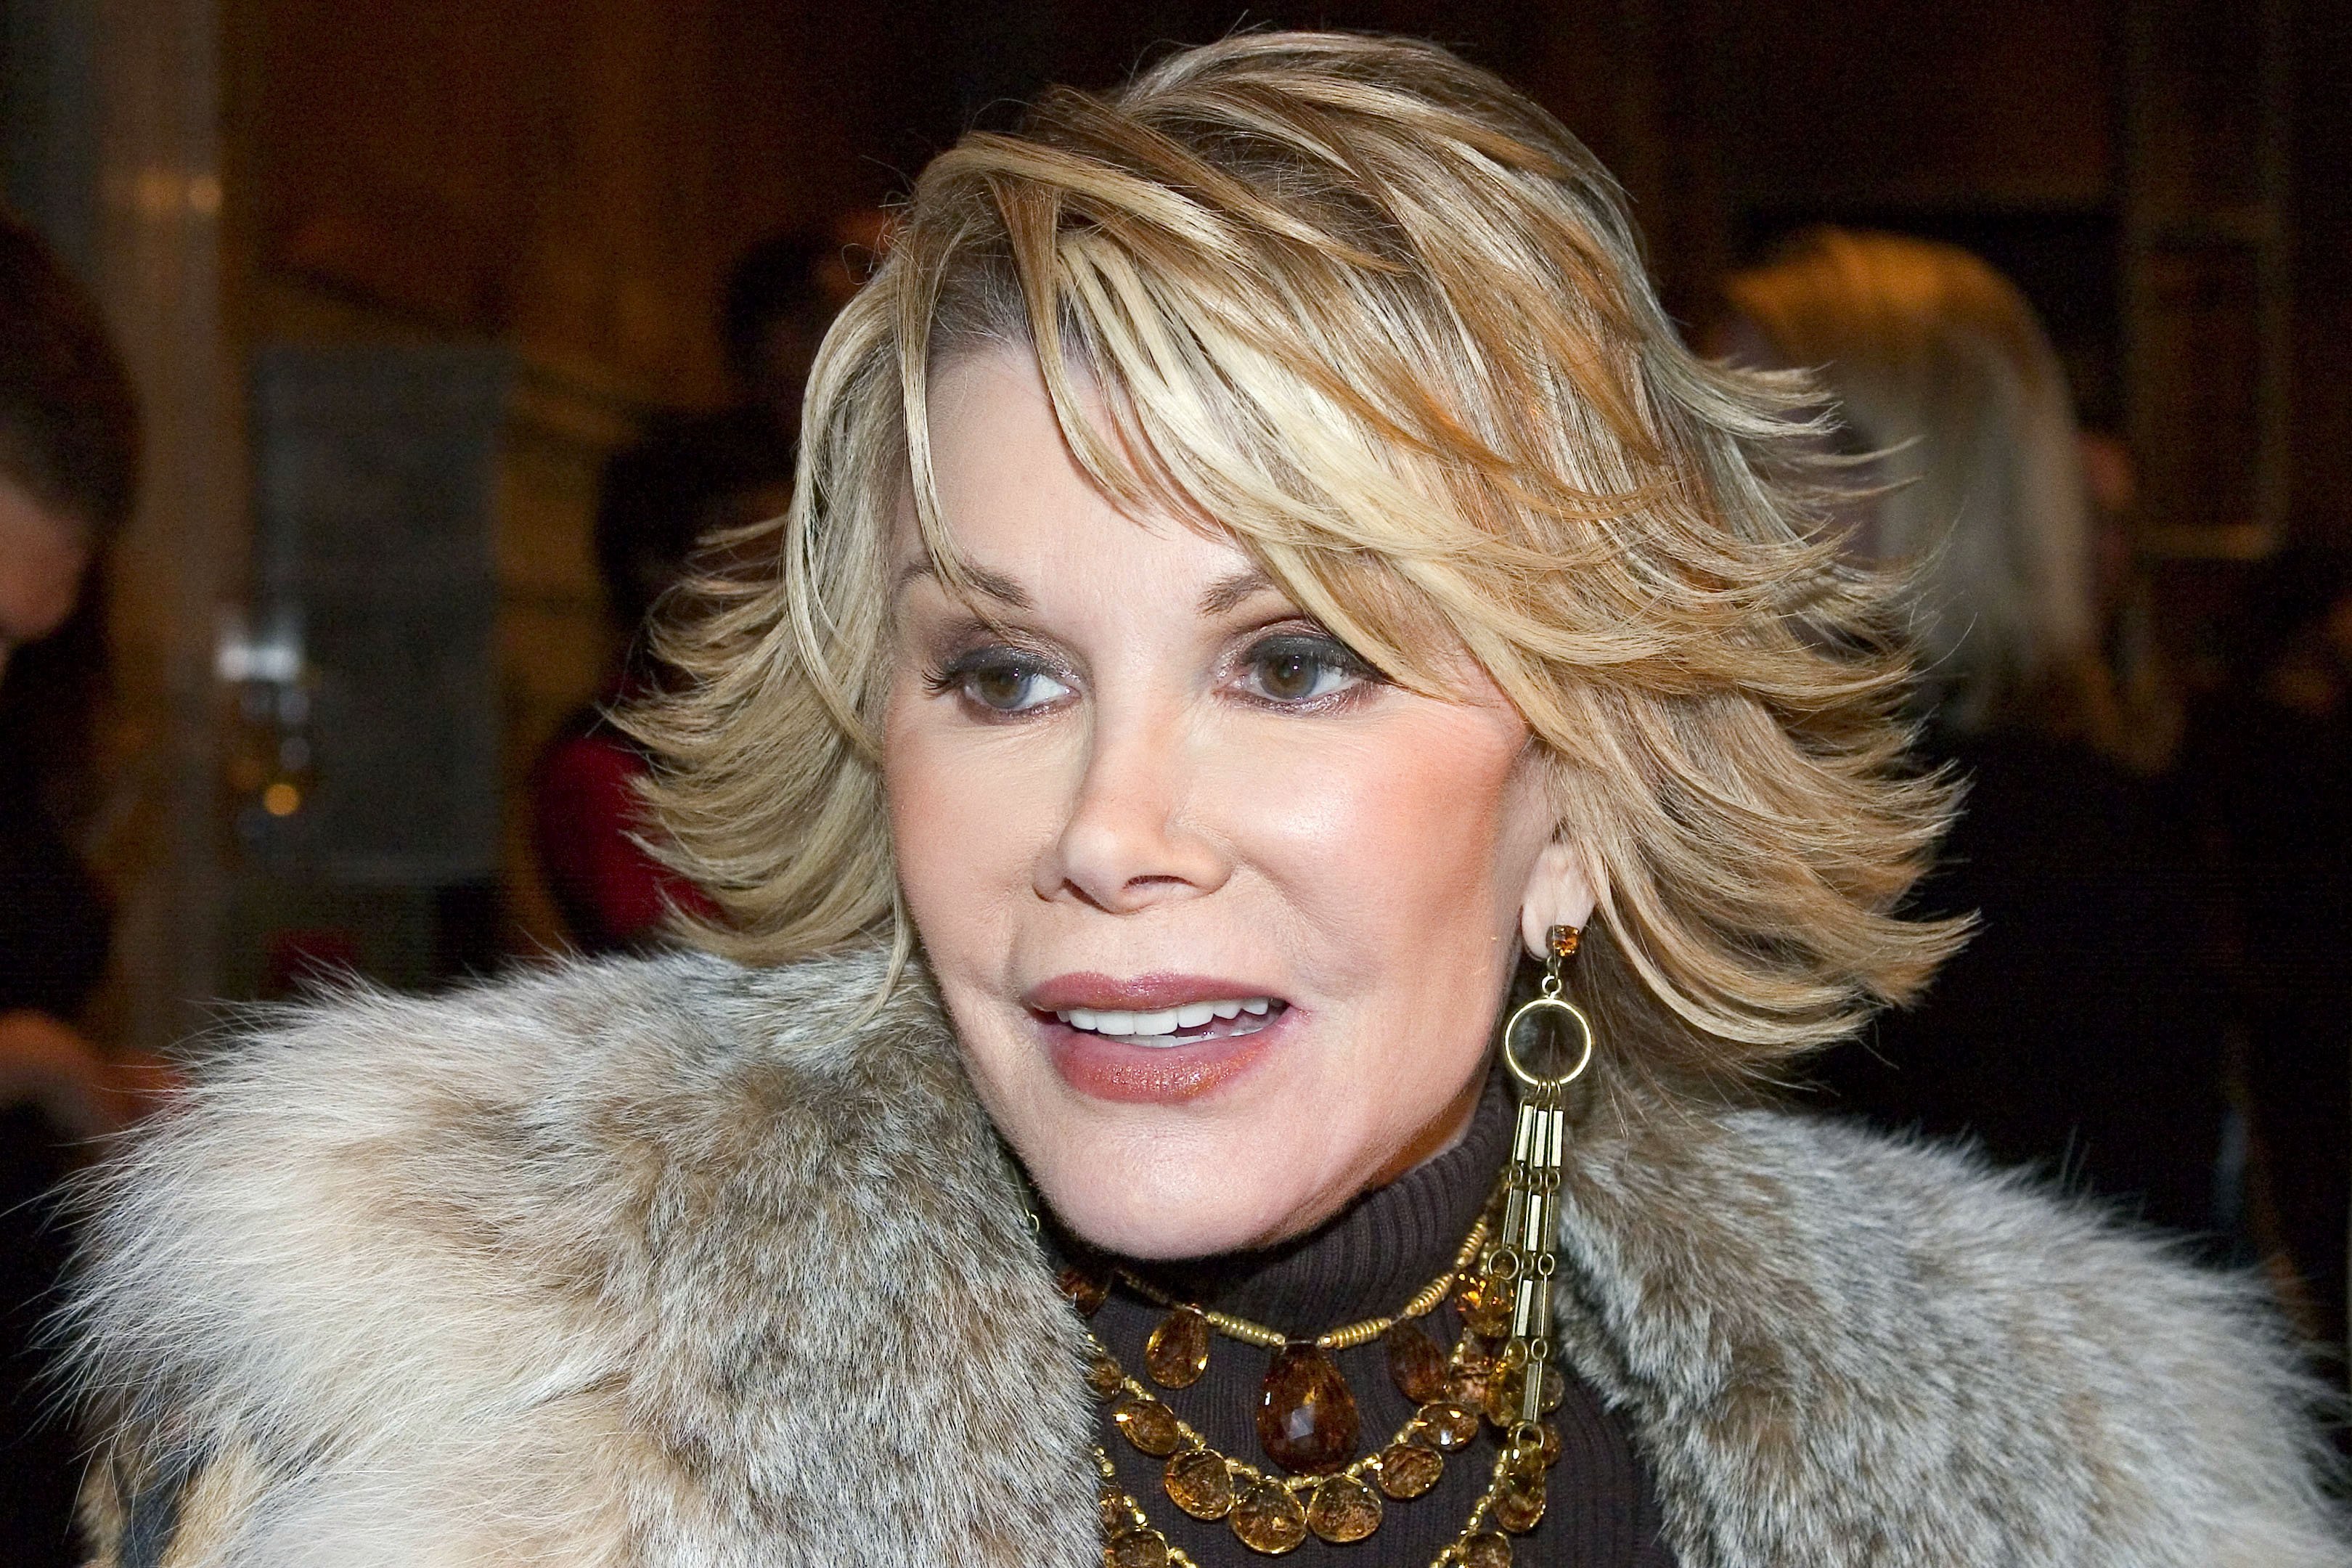 Joan Rivers arrives for the Banana Republic 2005 Spring Collection in New York City on October 25, 2004 | Photo: Getty Images